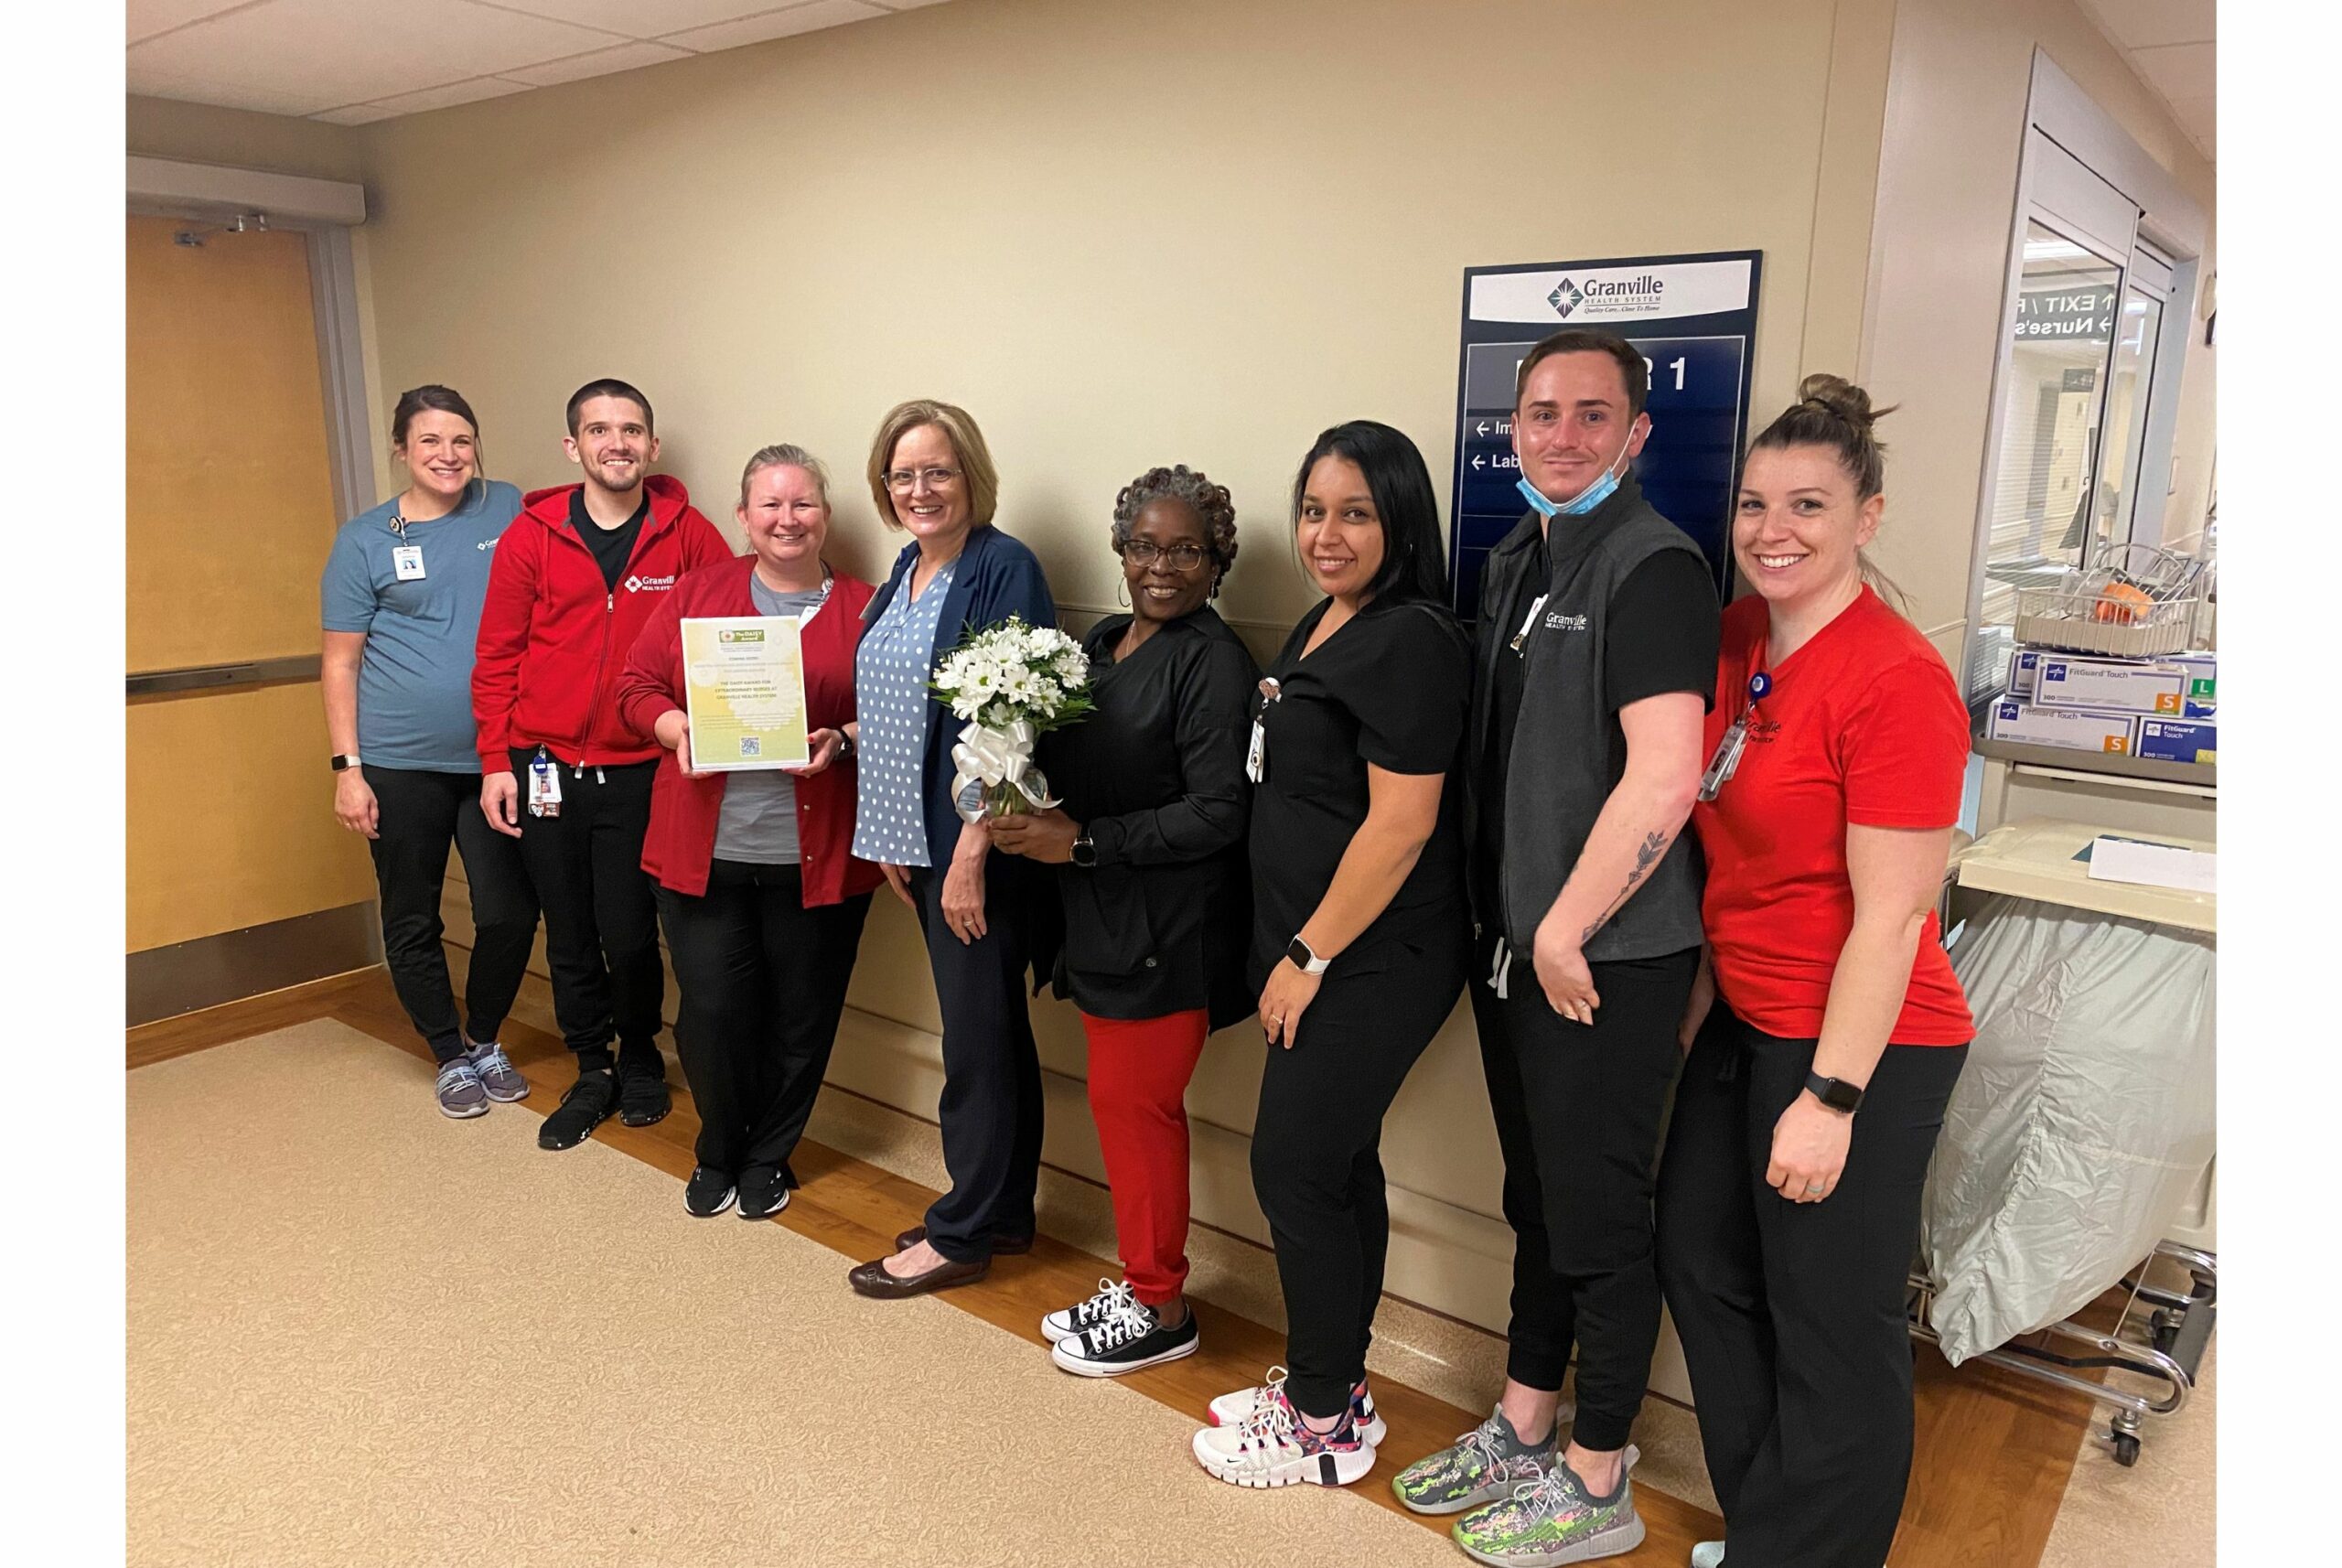 The Daisy Foundation™ Recognizes Extraordinary Nurses at Granville Health System